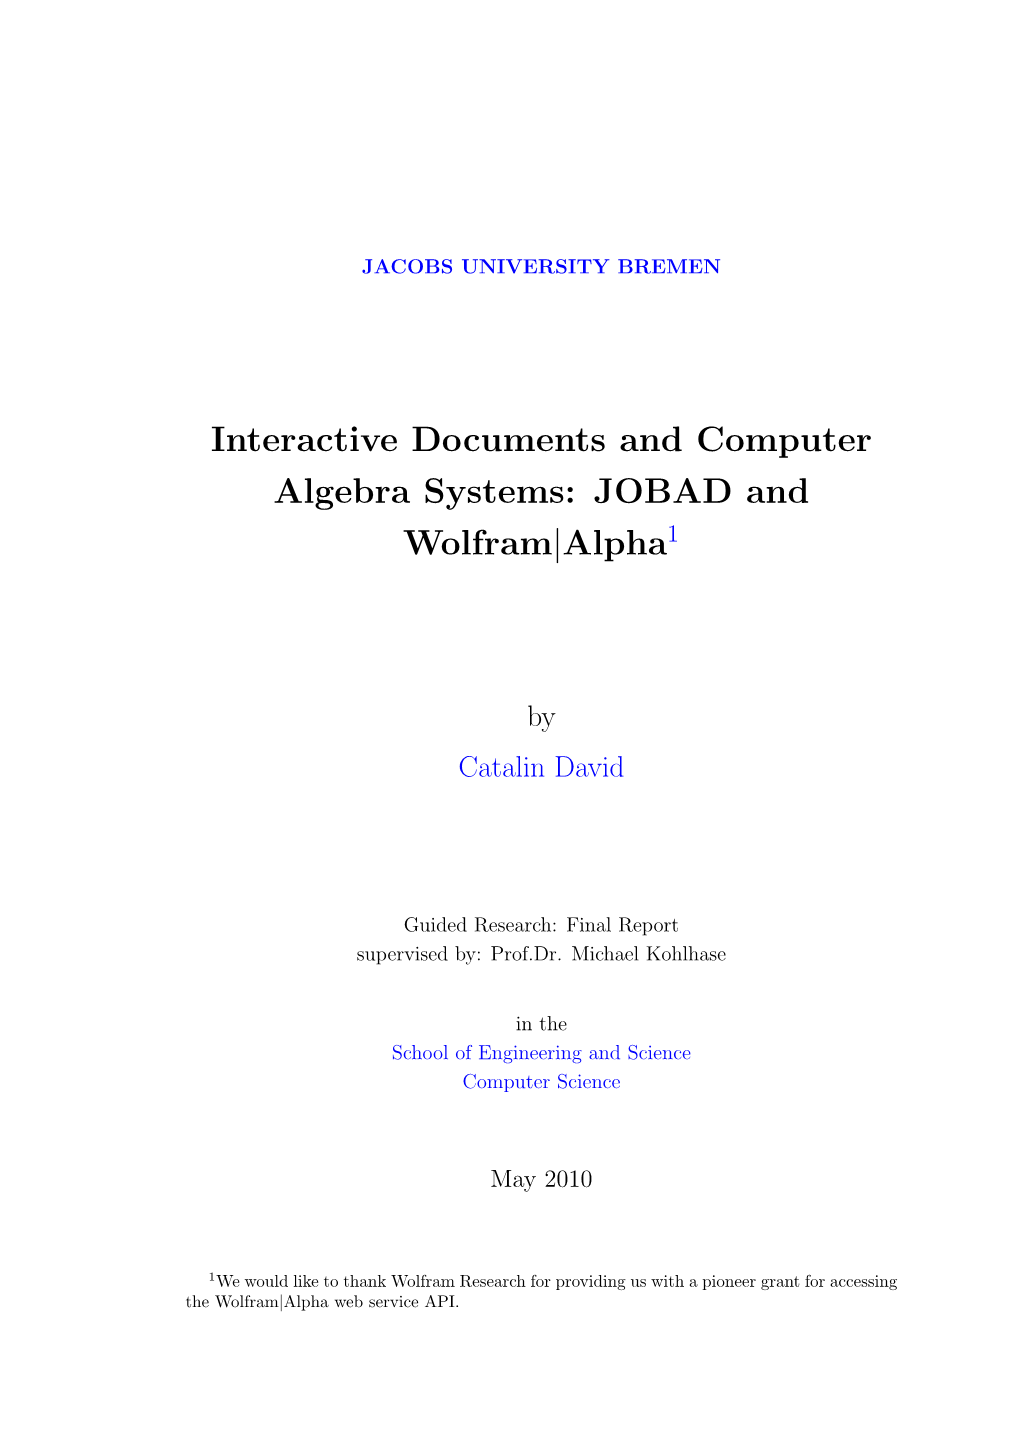 Interactive Documents and Computer Algebra Systems: JOBAD and Wolfram|Alpha1